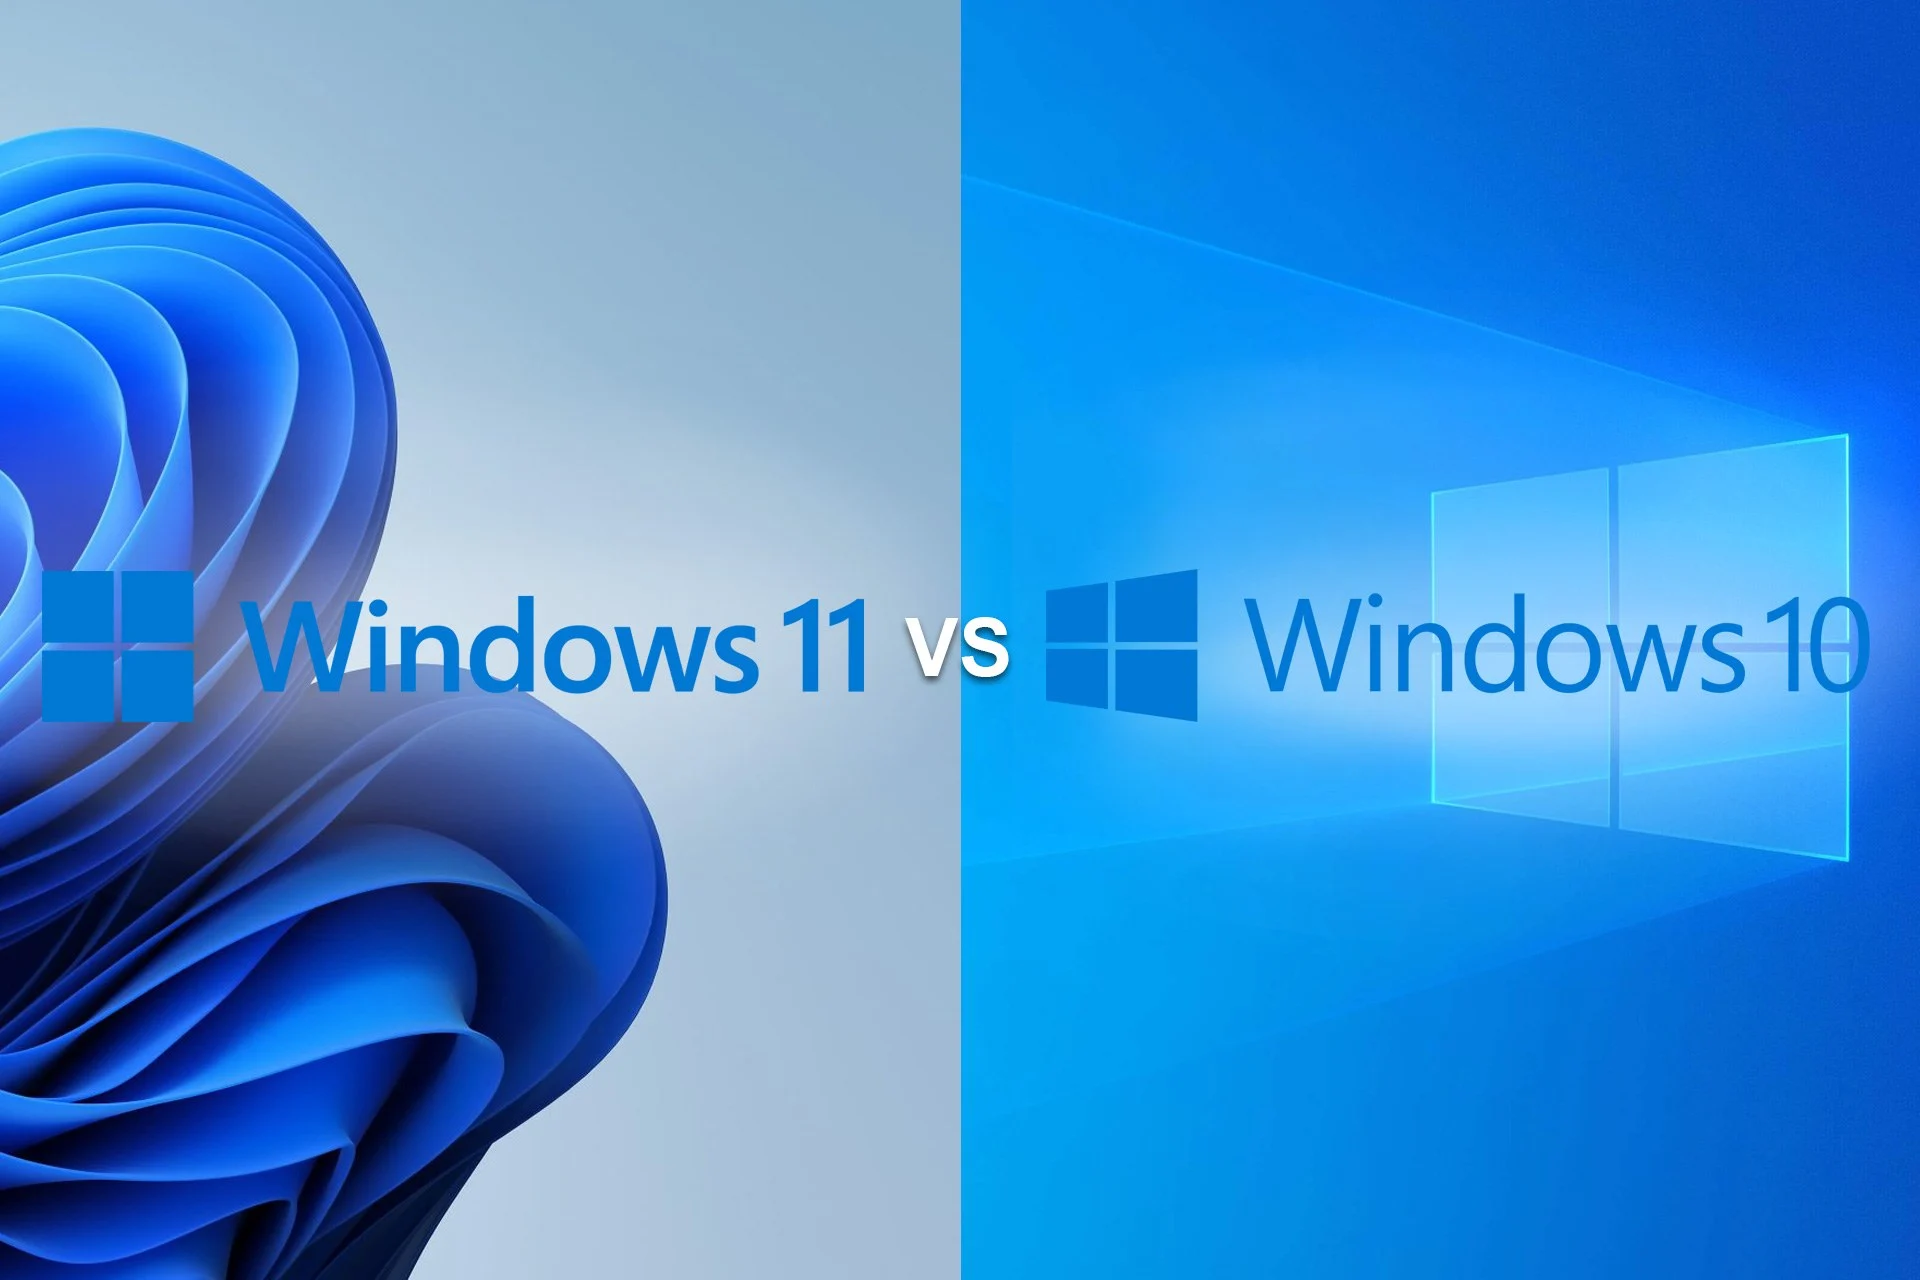 What New Changes did Windows 11 Incorporate?